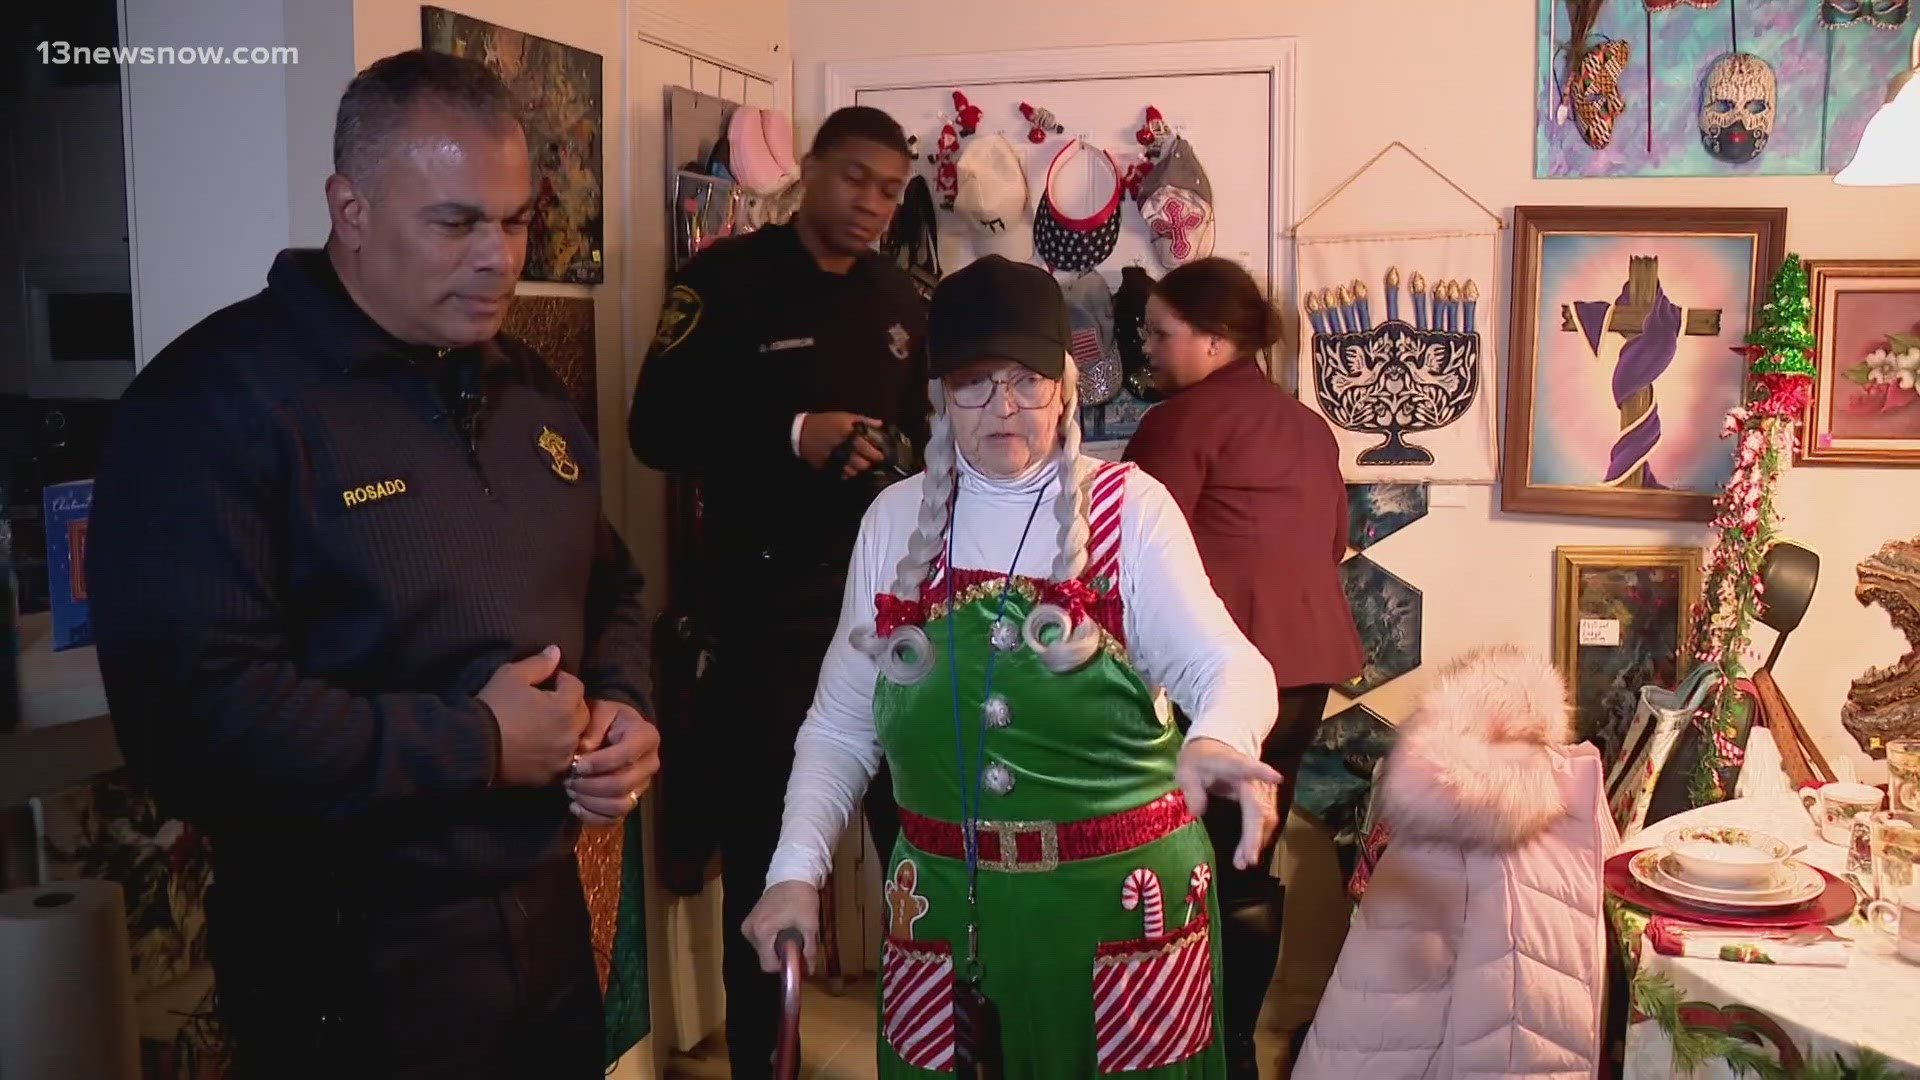 On Wednesday, the Chesapeake Sheriff's Office delivered dozens of baskets filled with food, gift cards, and more.